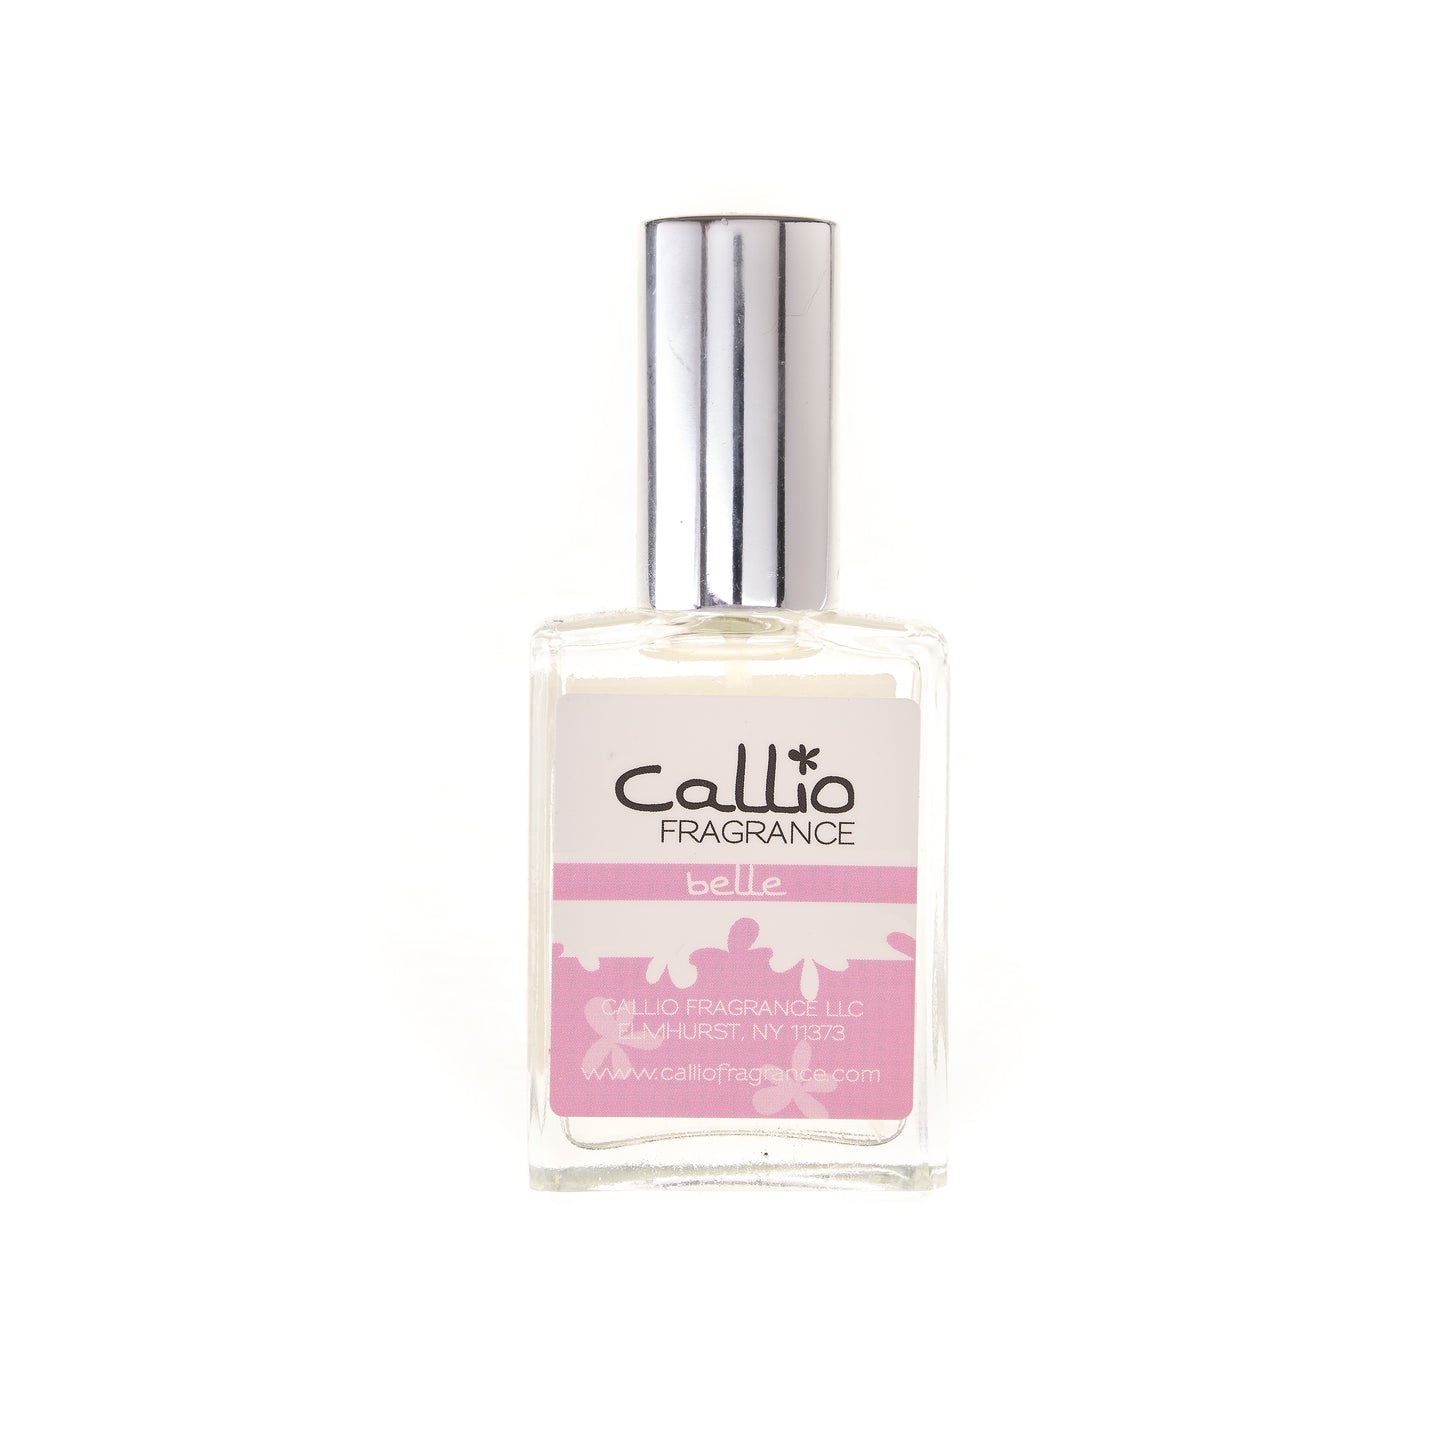 One ounce glass bottle of Belle perfume with a silver spray top on a white background.